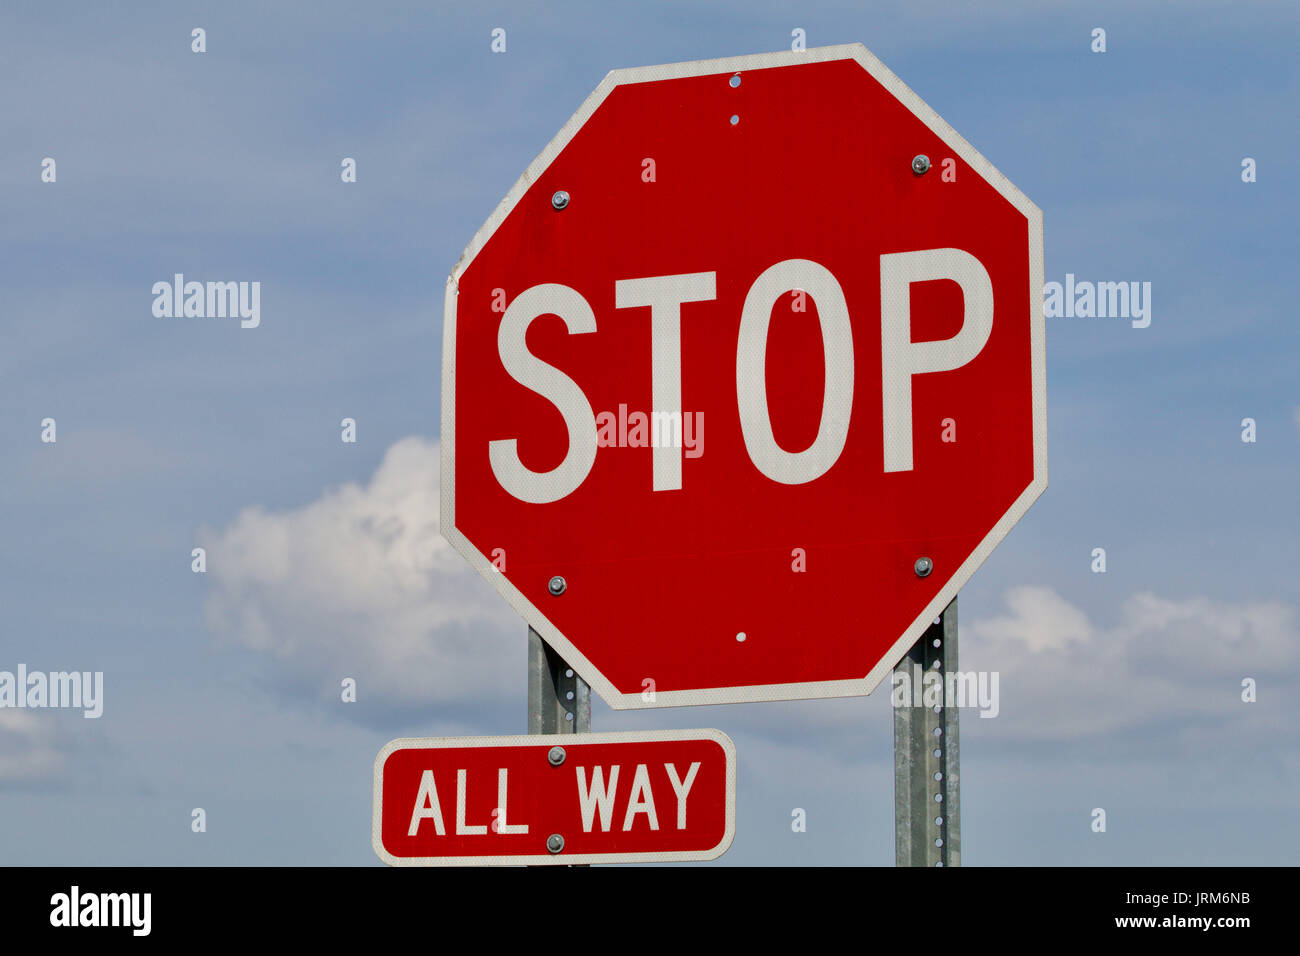 All way stop Stock Photo